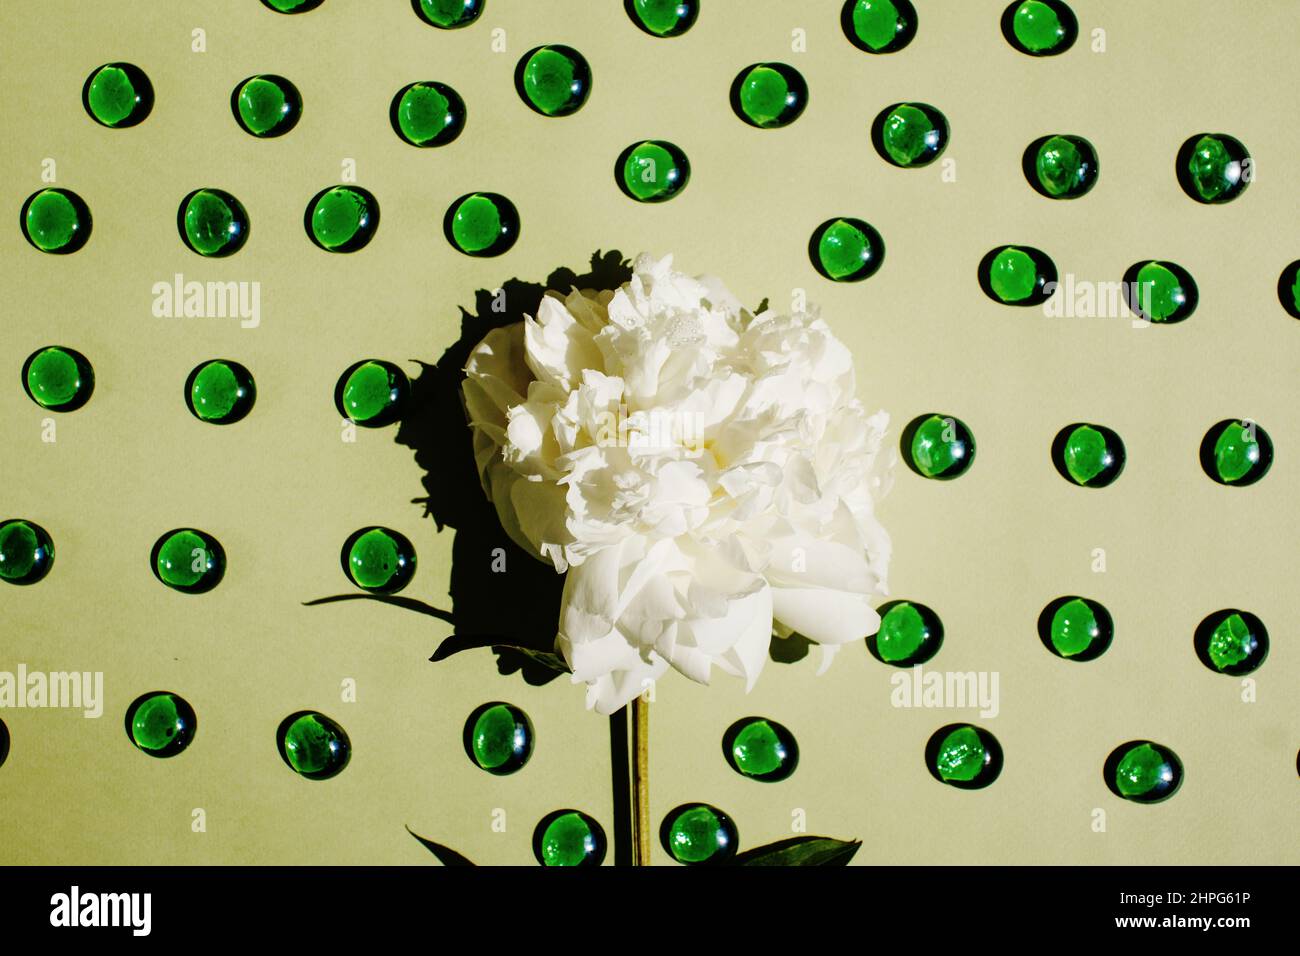 Flat lay with white peony flower close-up on pastel light green color with green marbles Stock Photo